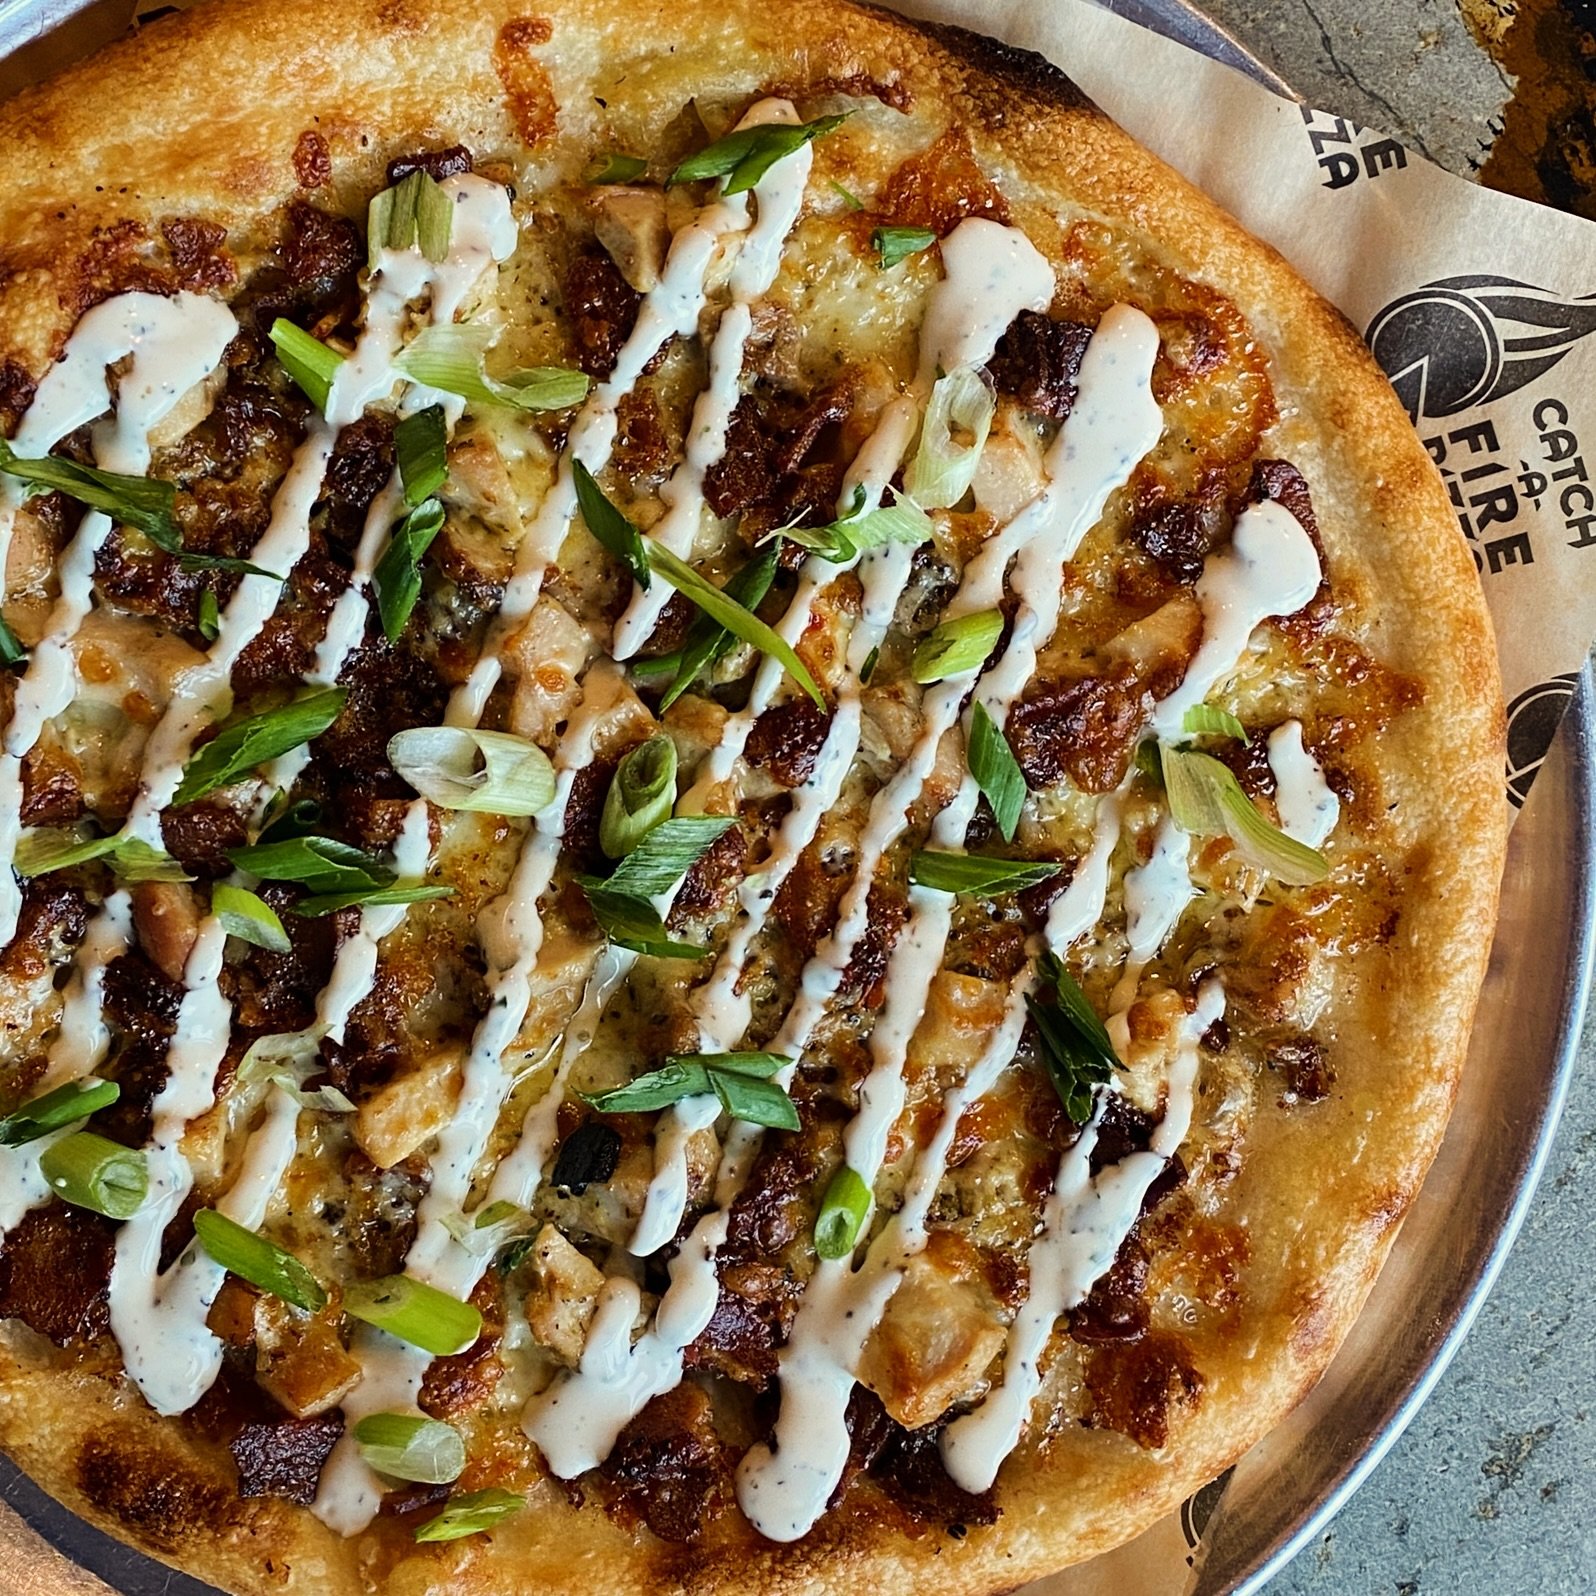 Rebel Ranch pizza -hand tossed dough brushed with garlic butter, topped with chicken, bacon, four cheeses, white cheddar, scallions &amp; ranch- you&rsquo;re probably going to want to ask for a side of ranch for dipping those slices! #extraranchpleas